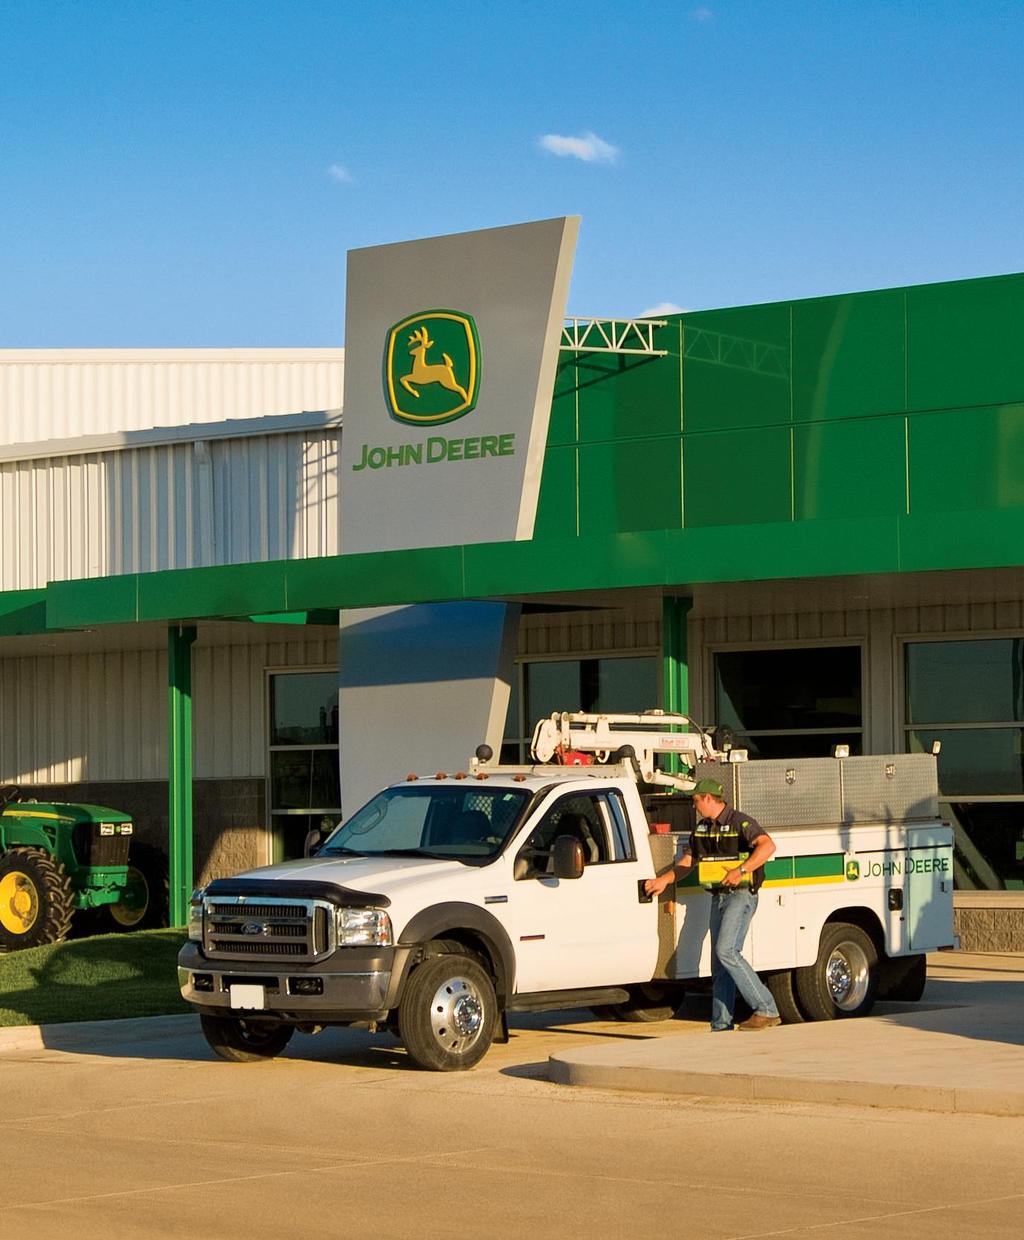 With a complete inventory of genuine John Deere parts, highly trained service technicians, and a thorough understanding